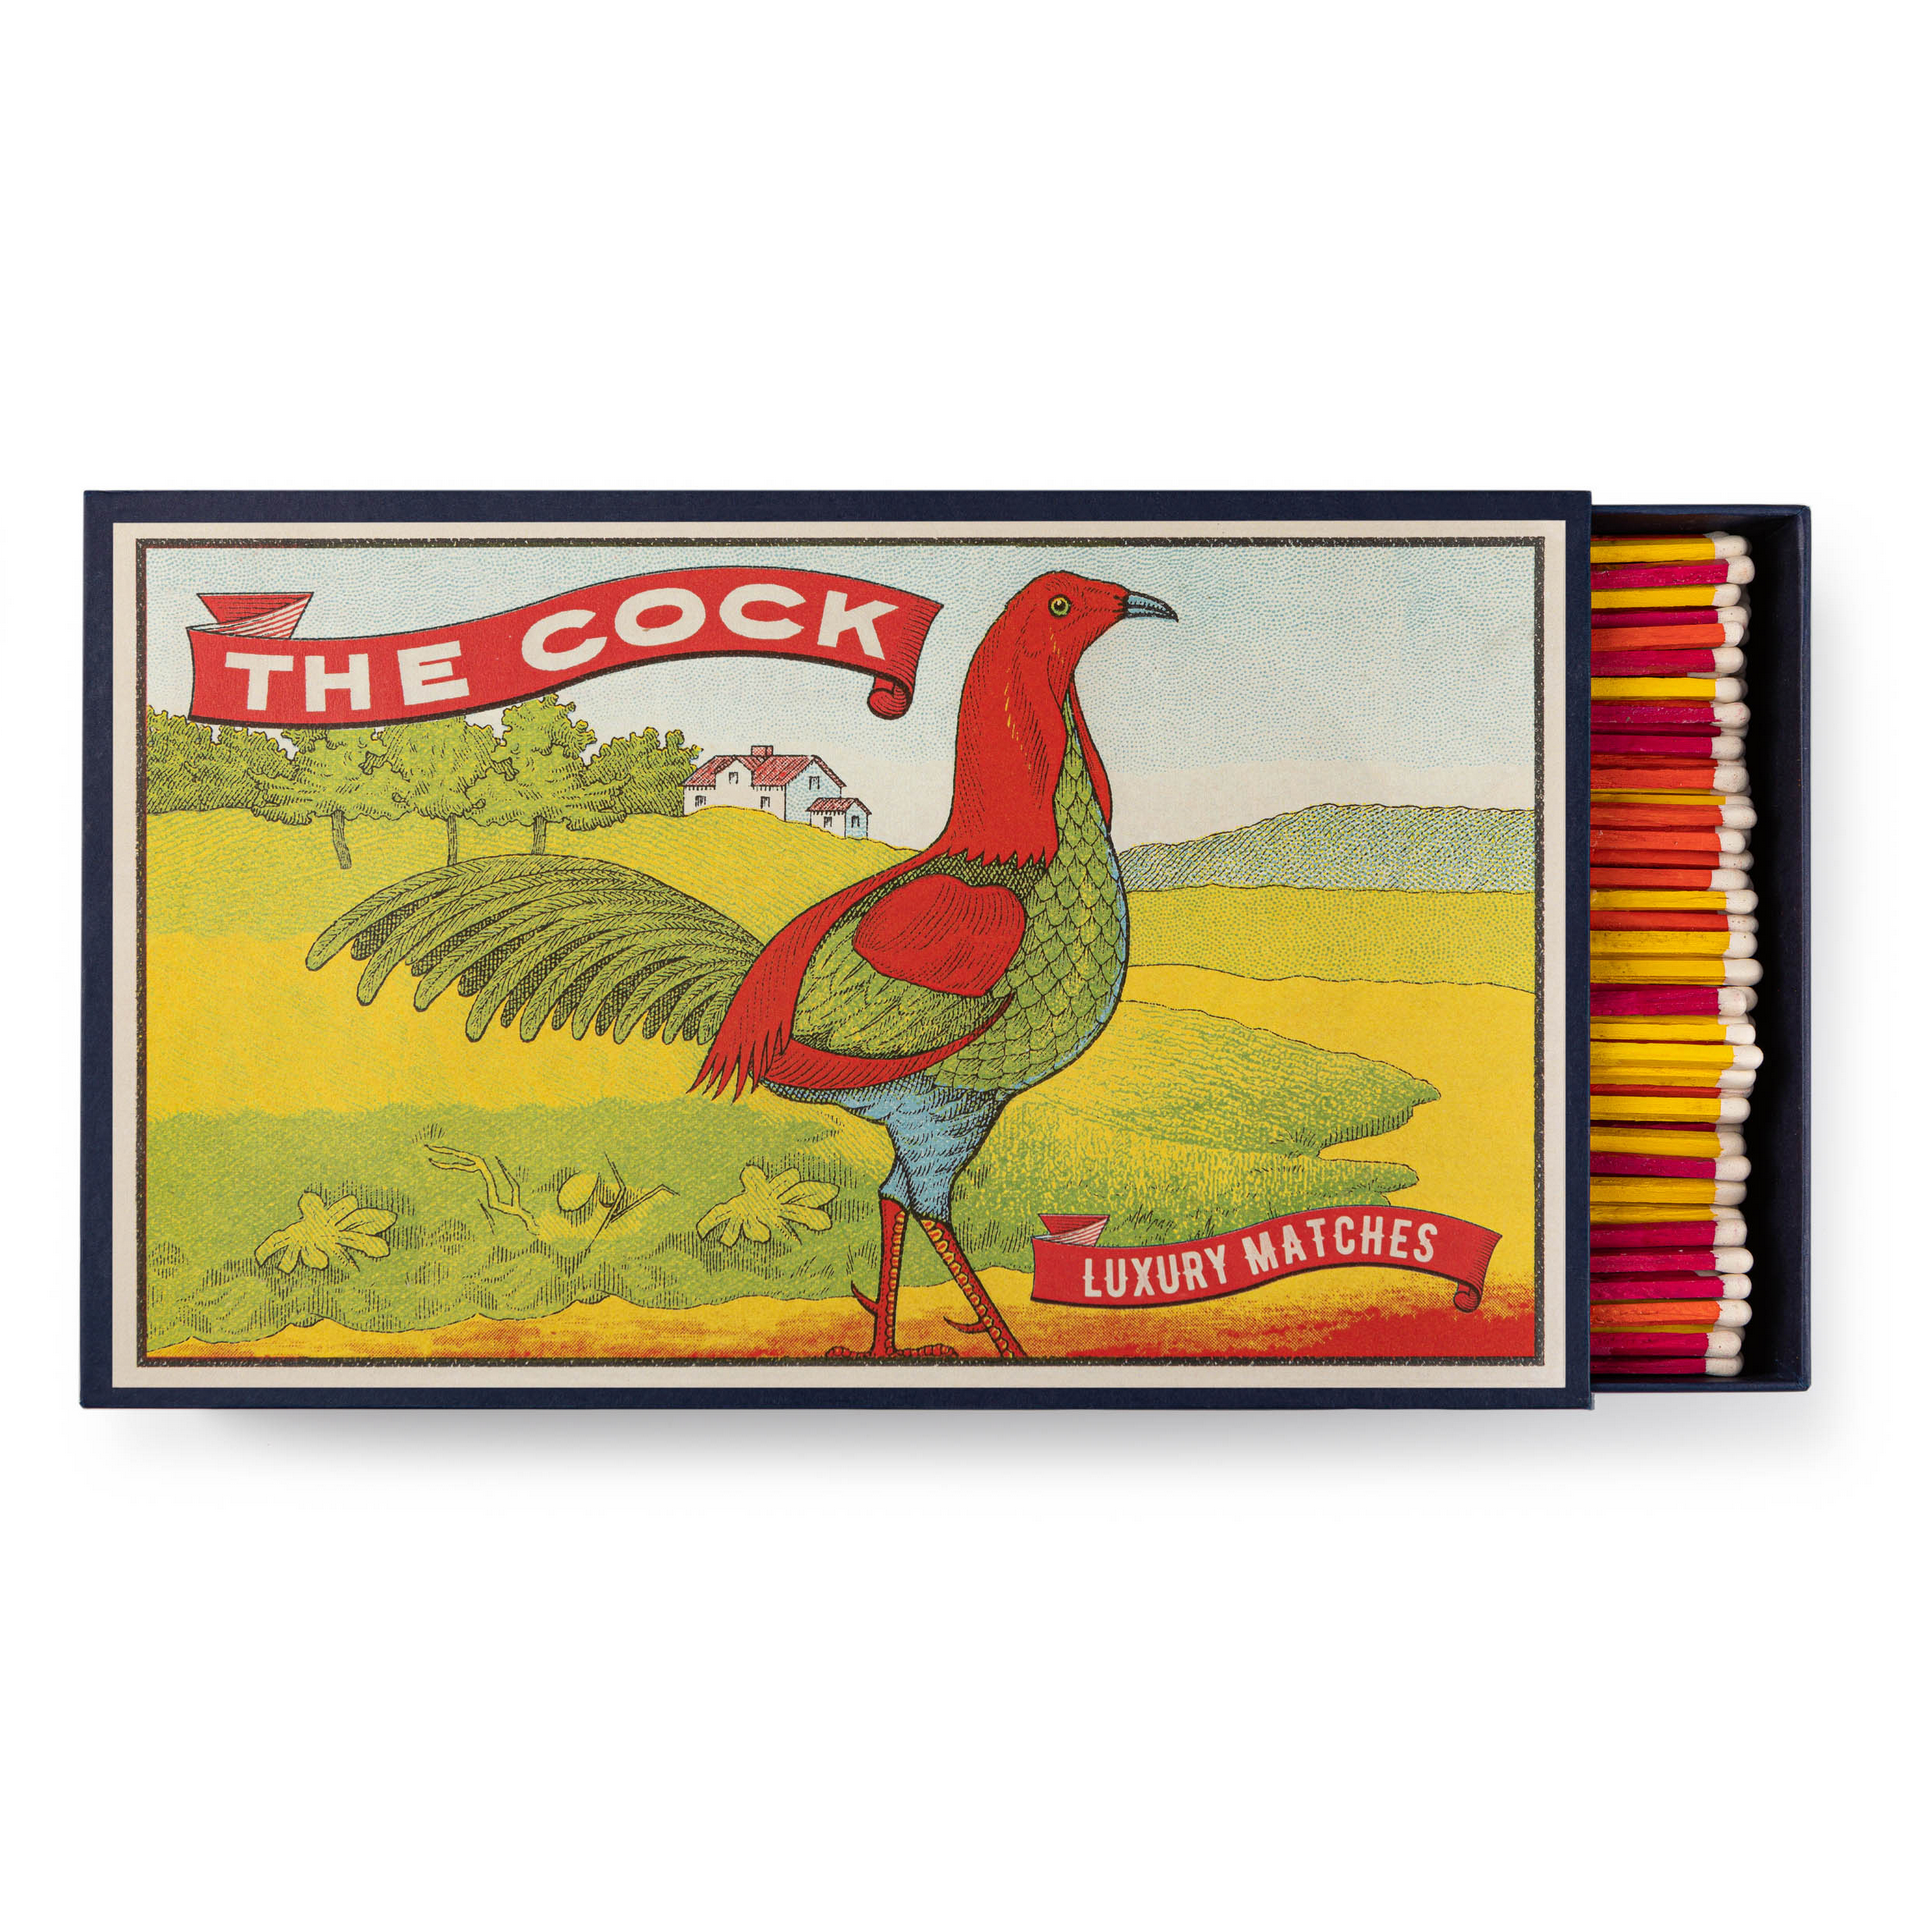 Archivist GIANT BOX OF MATCHES | THE COCK